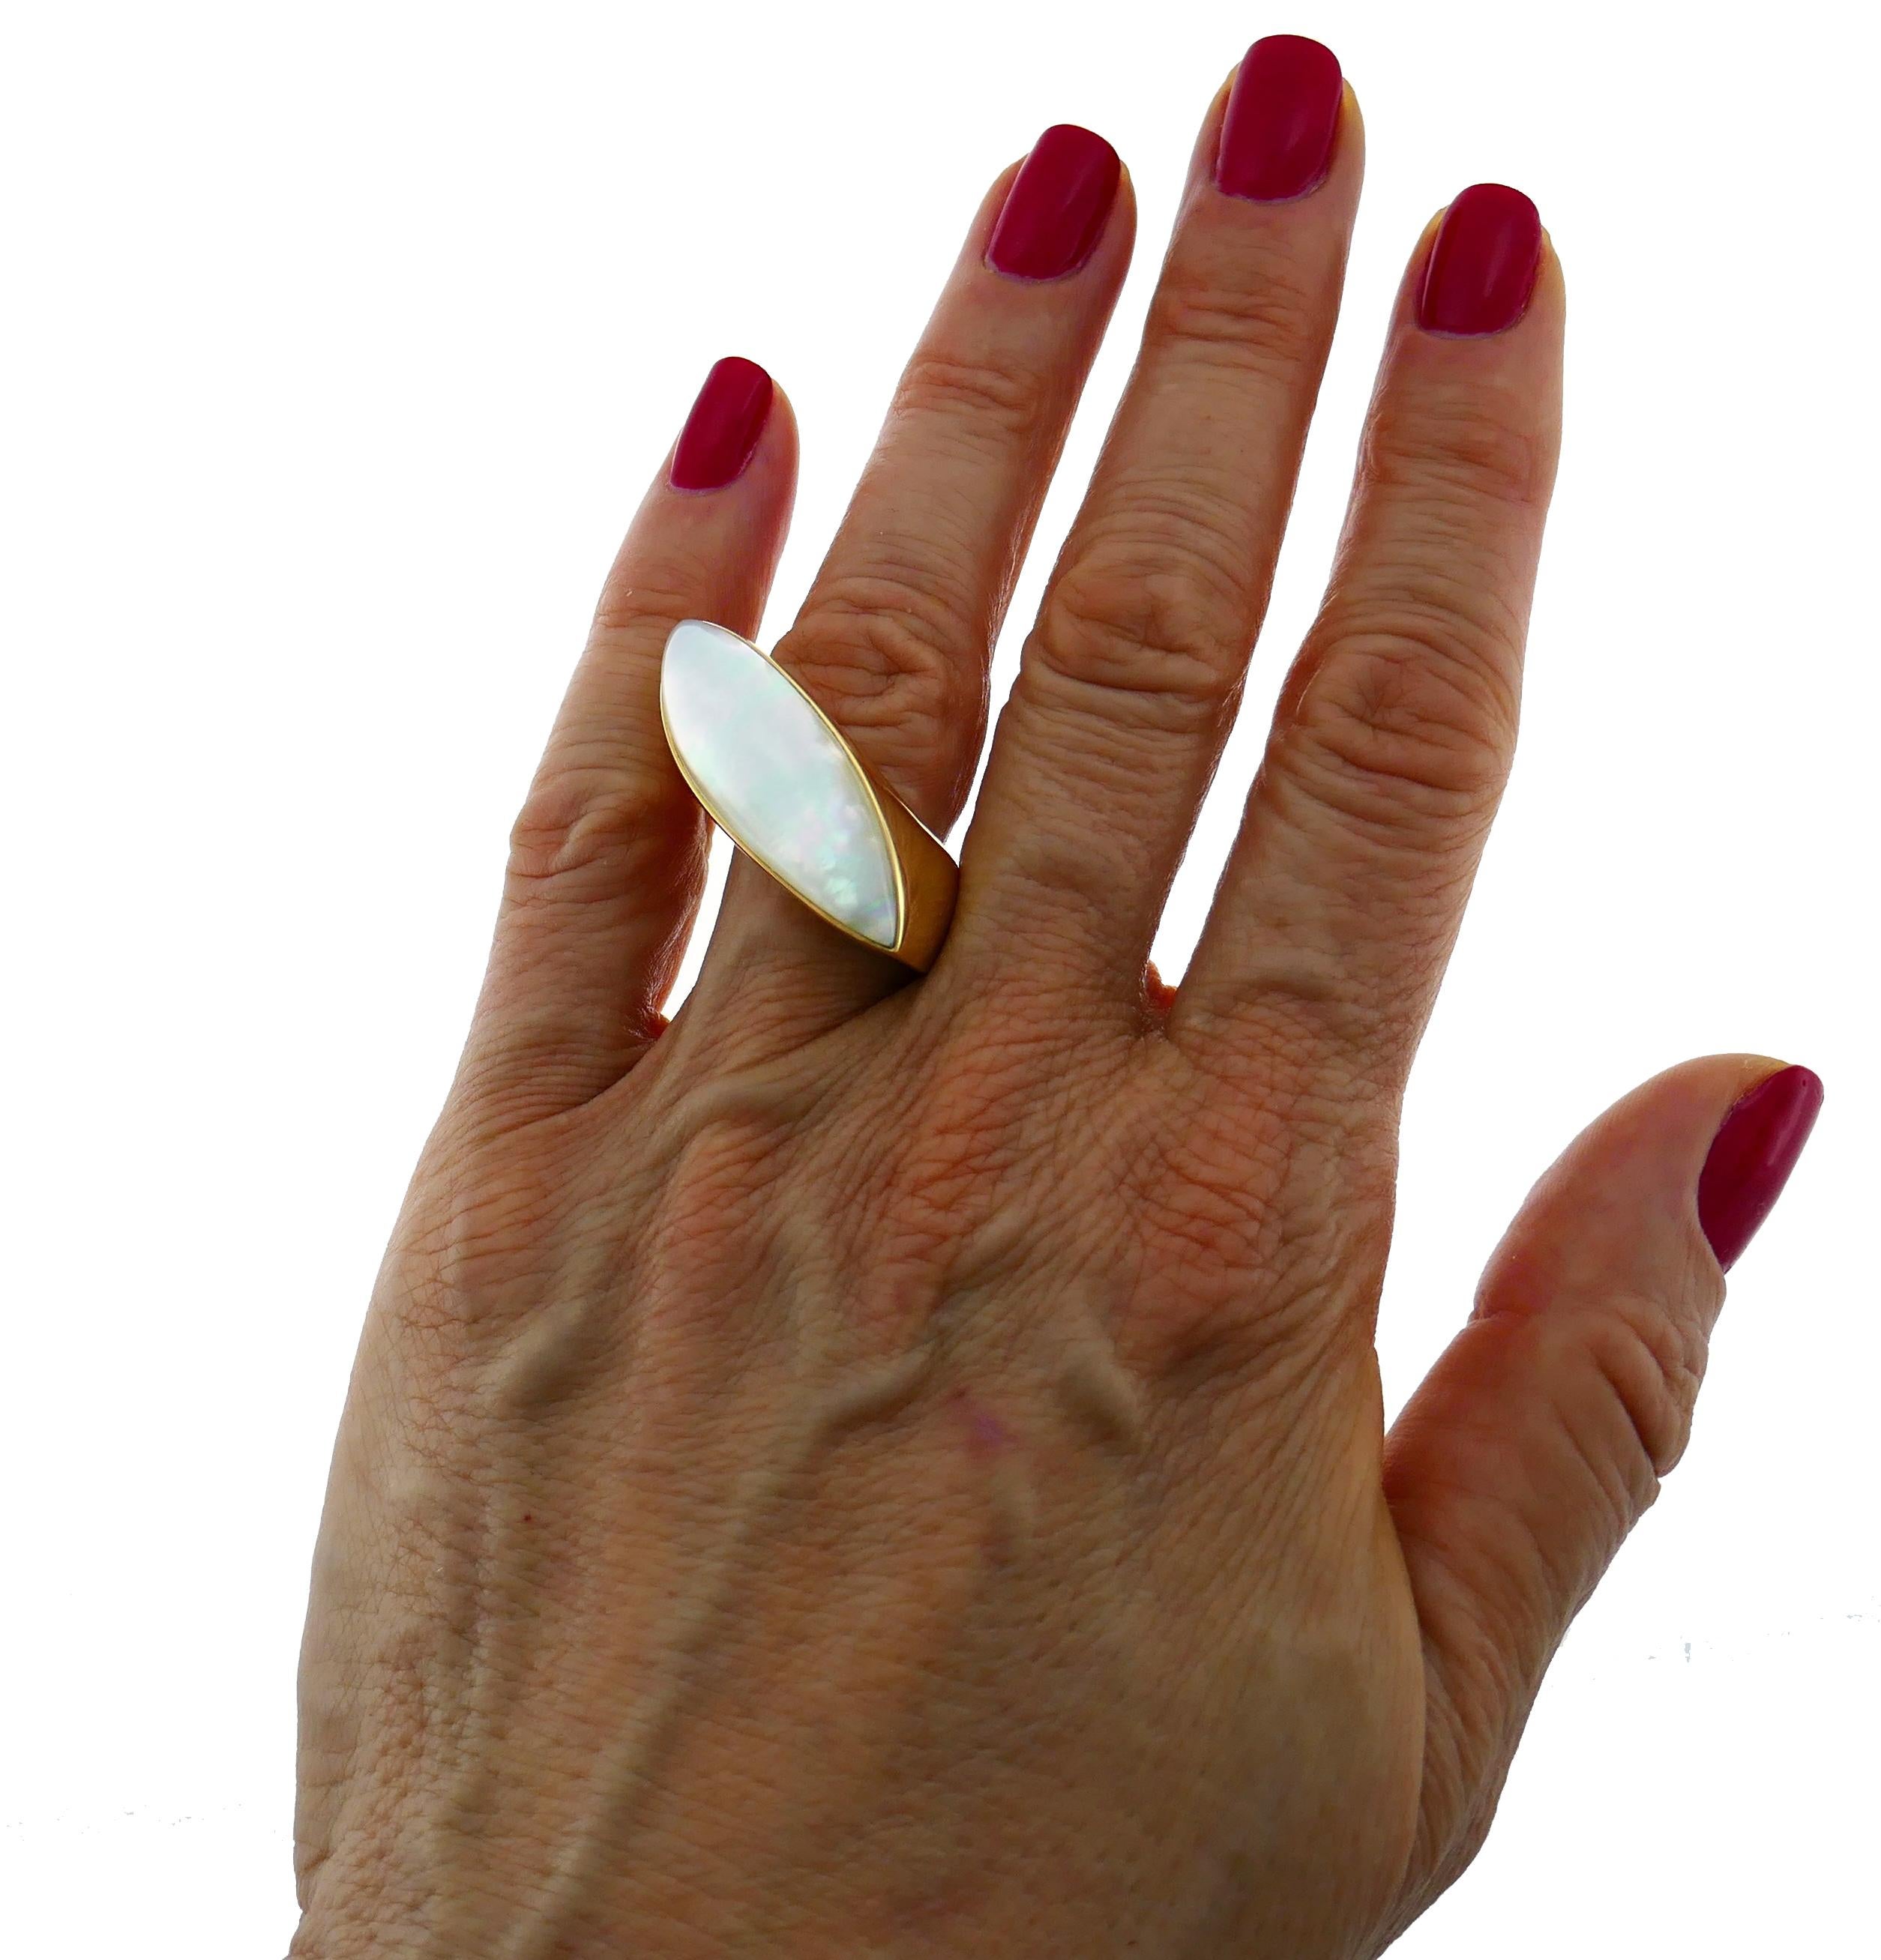 Stunning cocktail ring created by Italian jewelry House Vhernier. Beautiful asymmetrical shape and perfect lines are the highlights of this chic ring. Bold and wearable, the ring is a great addition to your jewelry collection.
Made of 18 karat